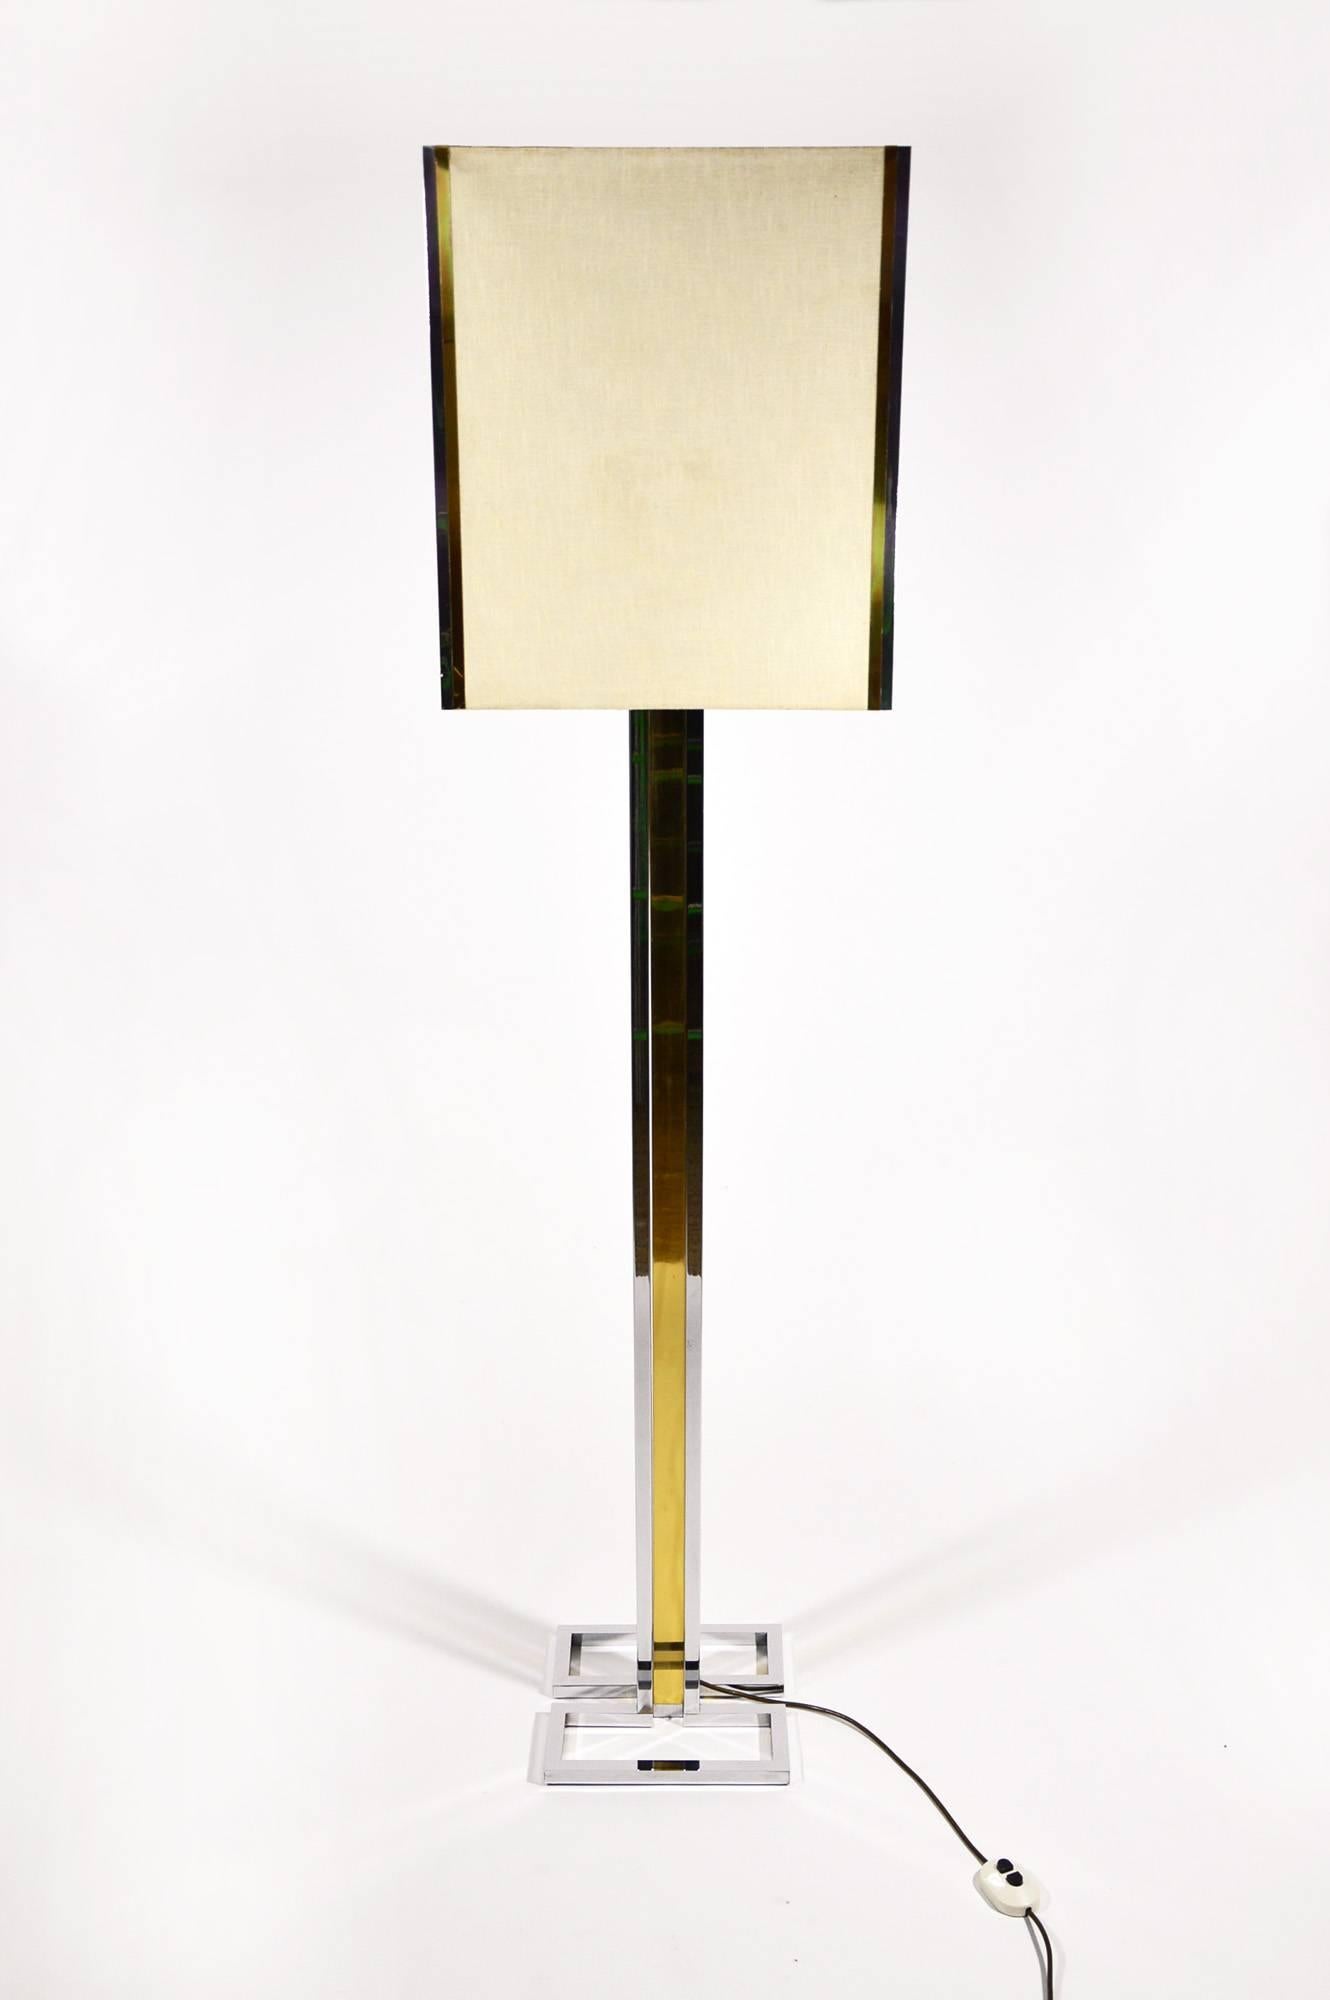 A geometric floor lamp designed by Willy Rizzo for BF, circa 1970, made of chromed metal and brass.
The lamp is in good original condition and still has the original shade. It has three E27 screw bulb sockets and a double switch, so you can light